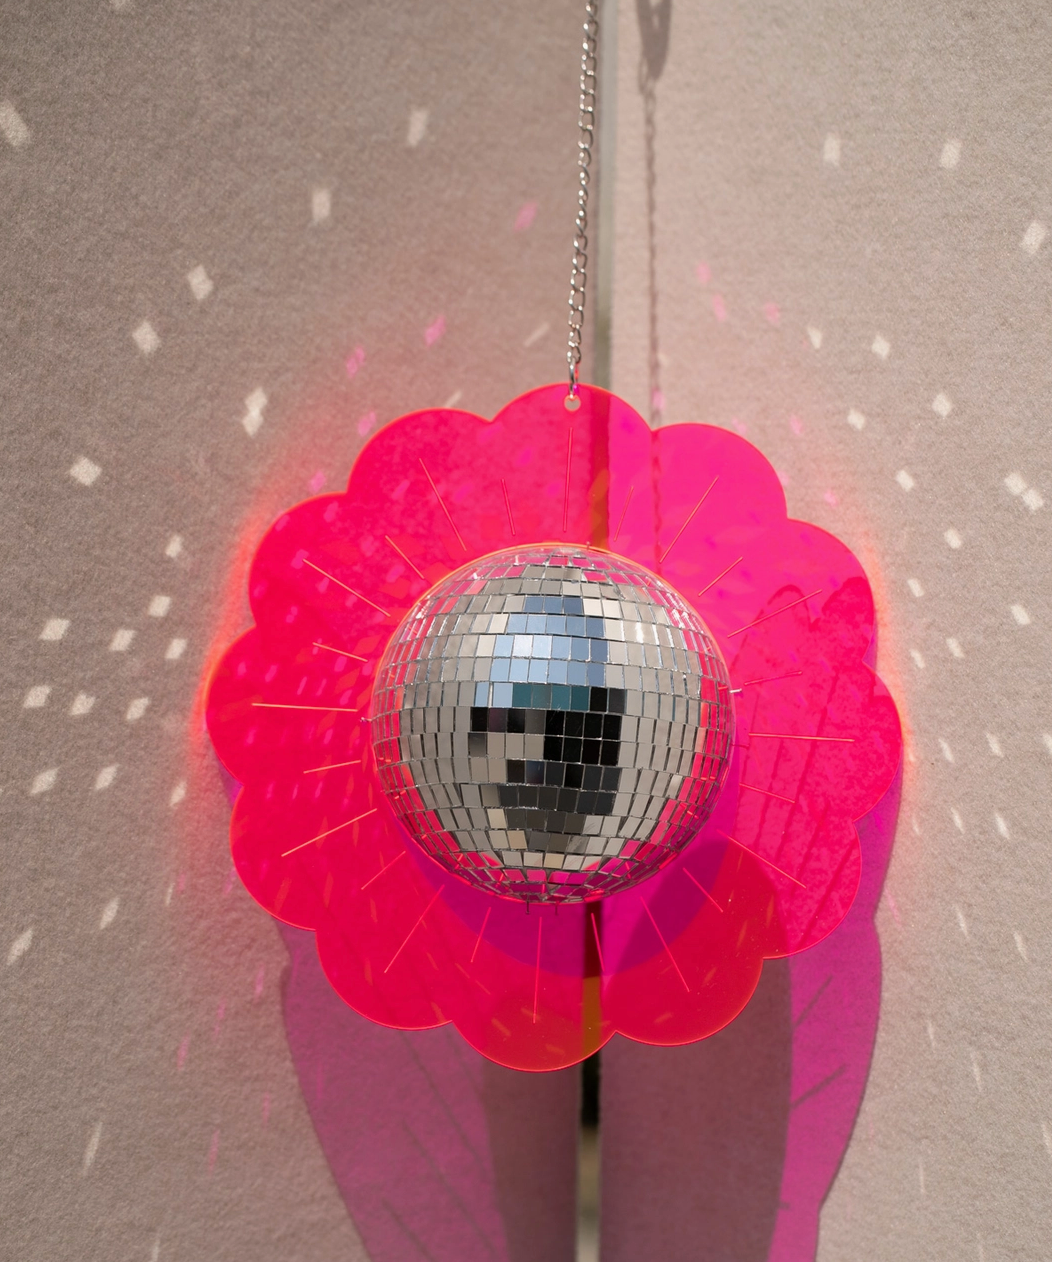 Disco Ball Framed in Hot Pink Acrylic Daisy (Large)